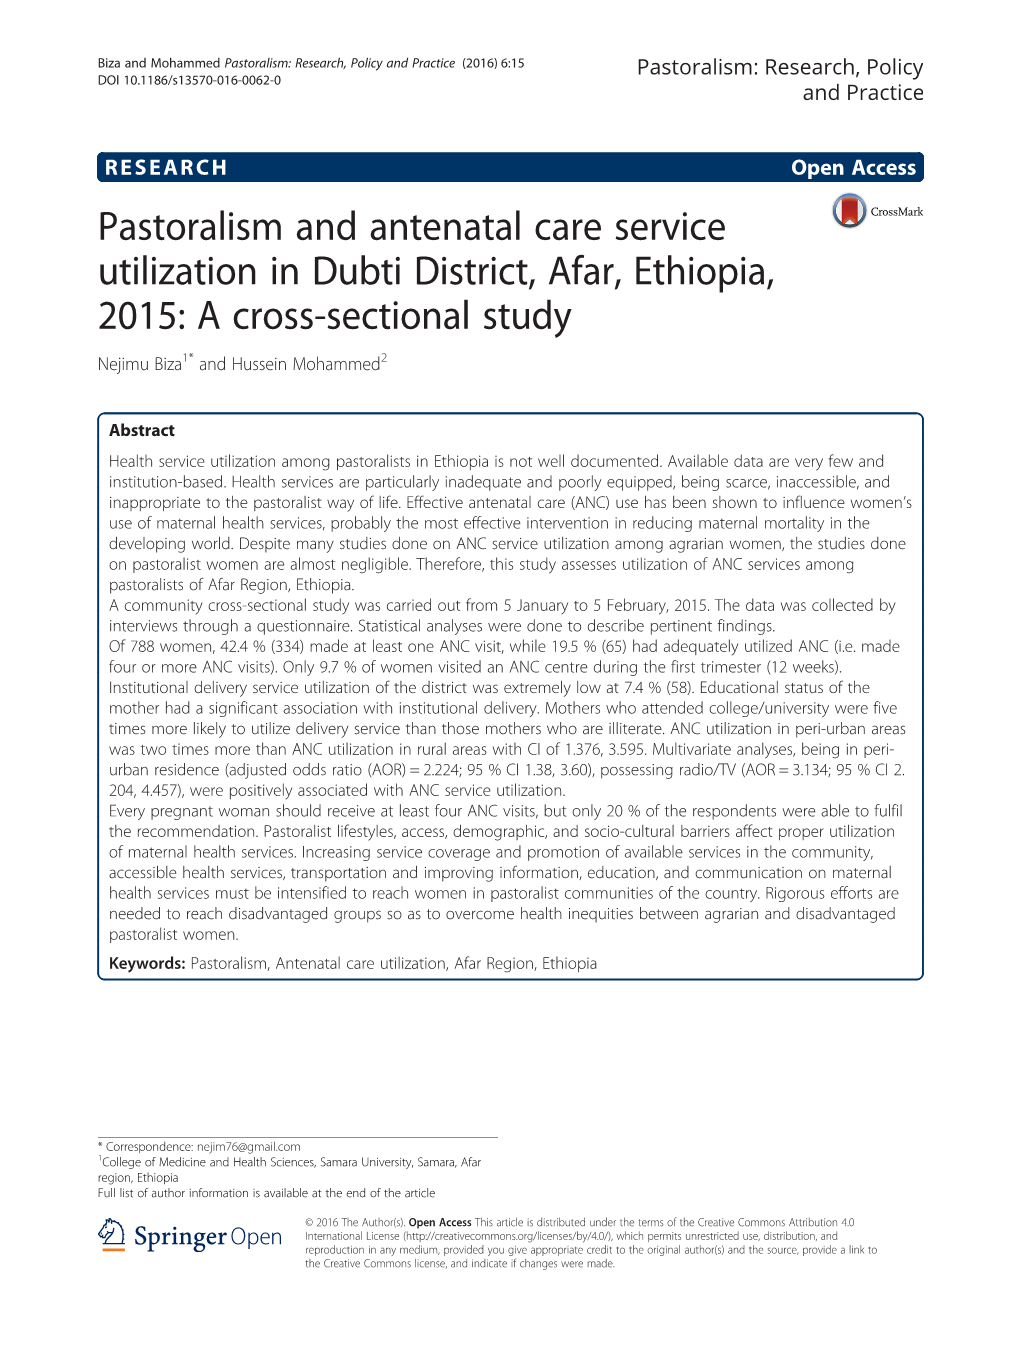 Pastoralism and Antenatal Care Service Utilization in Dubti District, Afar, Ethiopia, 2015: a Cross-Sectional Study Nejimu Biza1* and Hussein Mohammed2